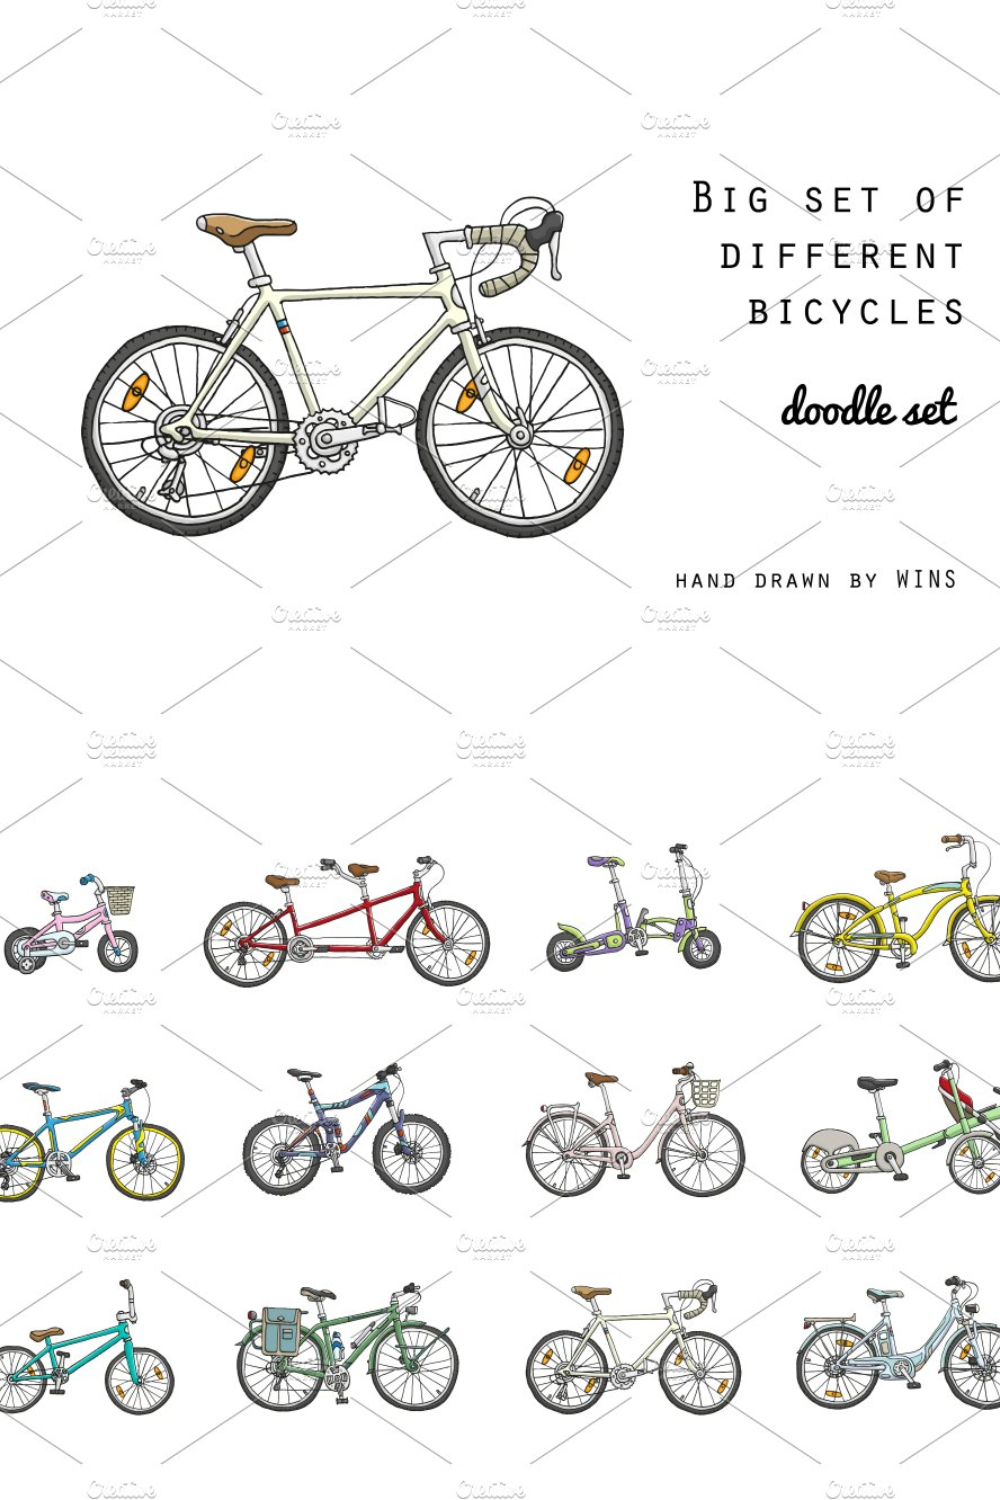 Big Set Of Different Bicycles - Pinterest.